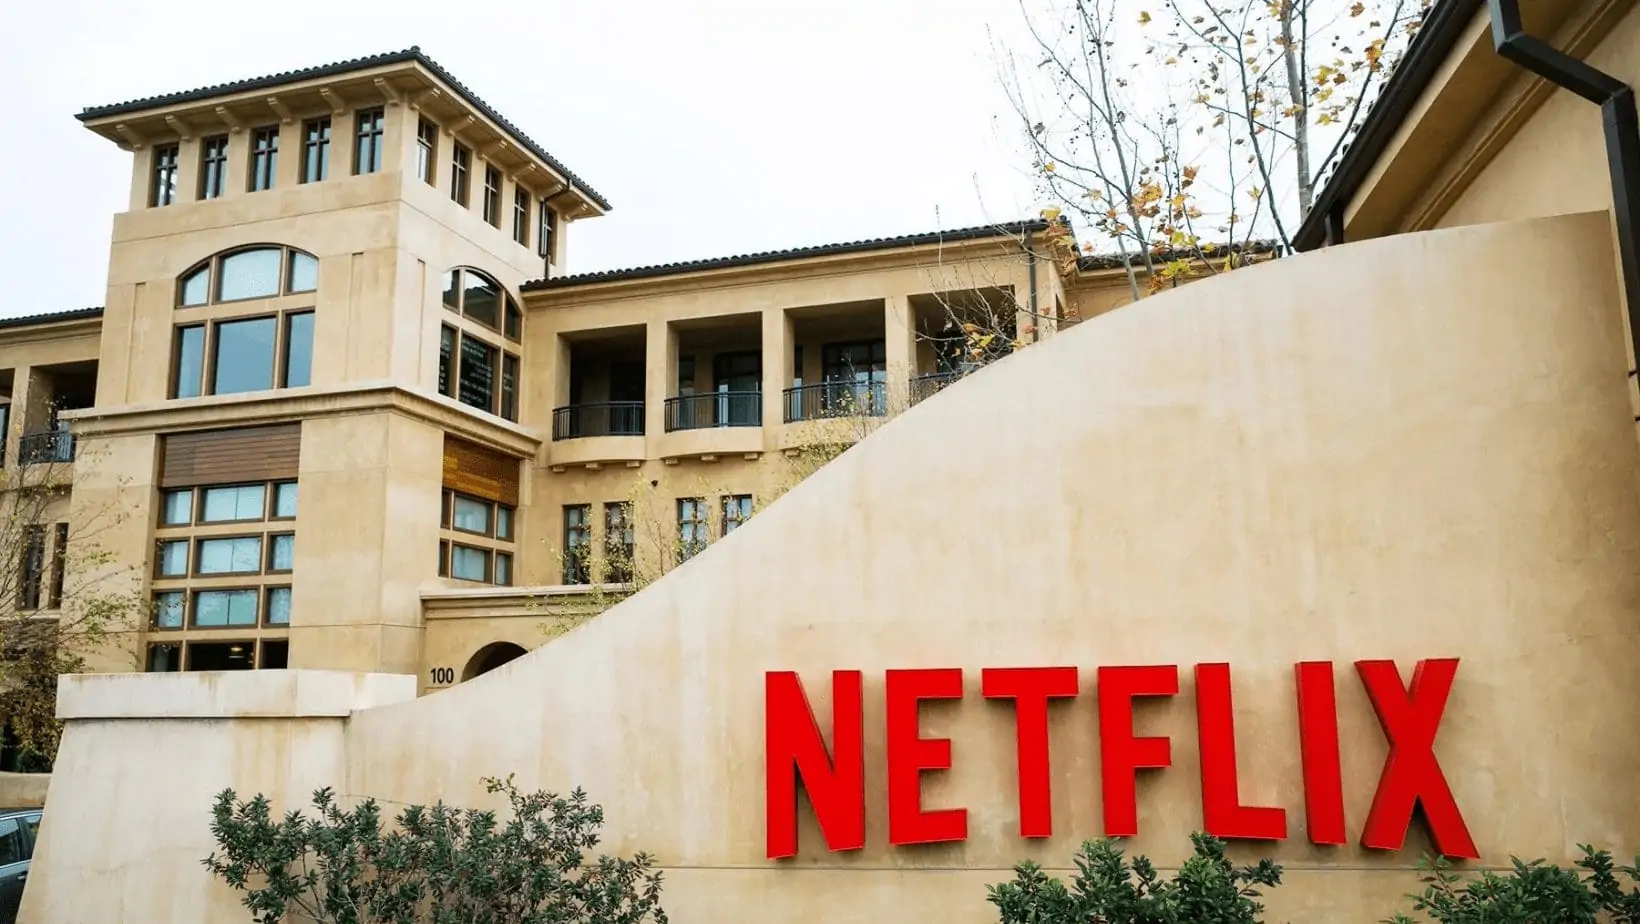 NetFlix Plan to host a live sporting event